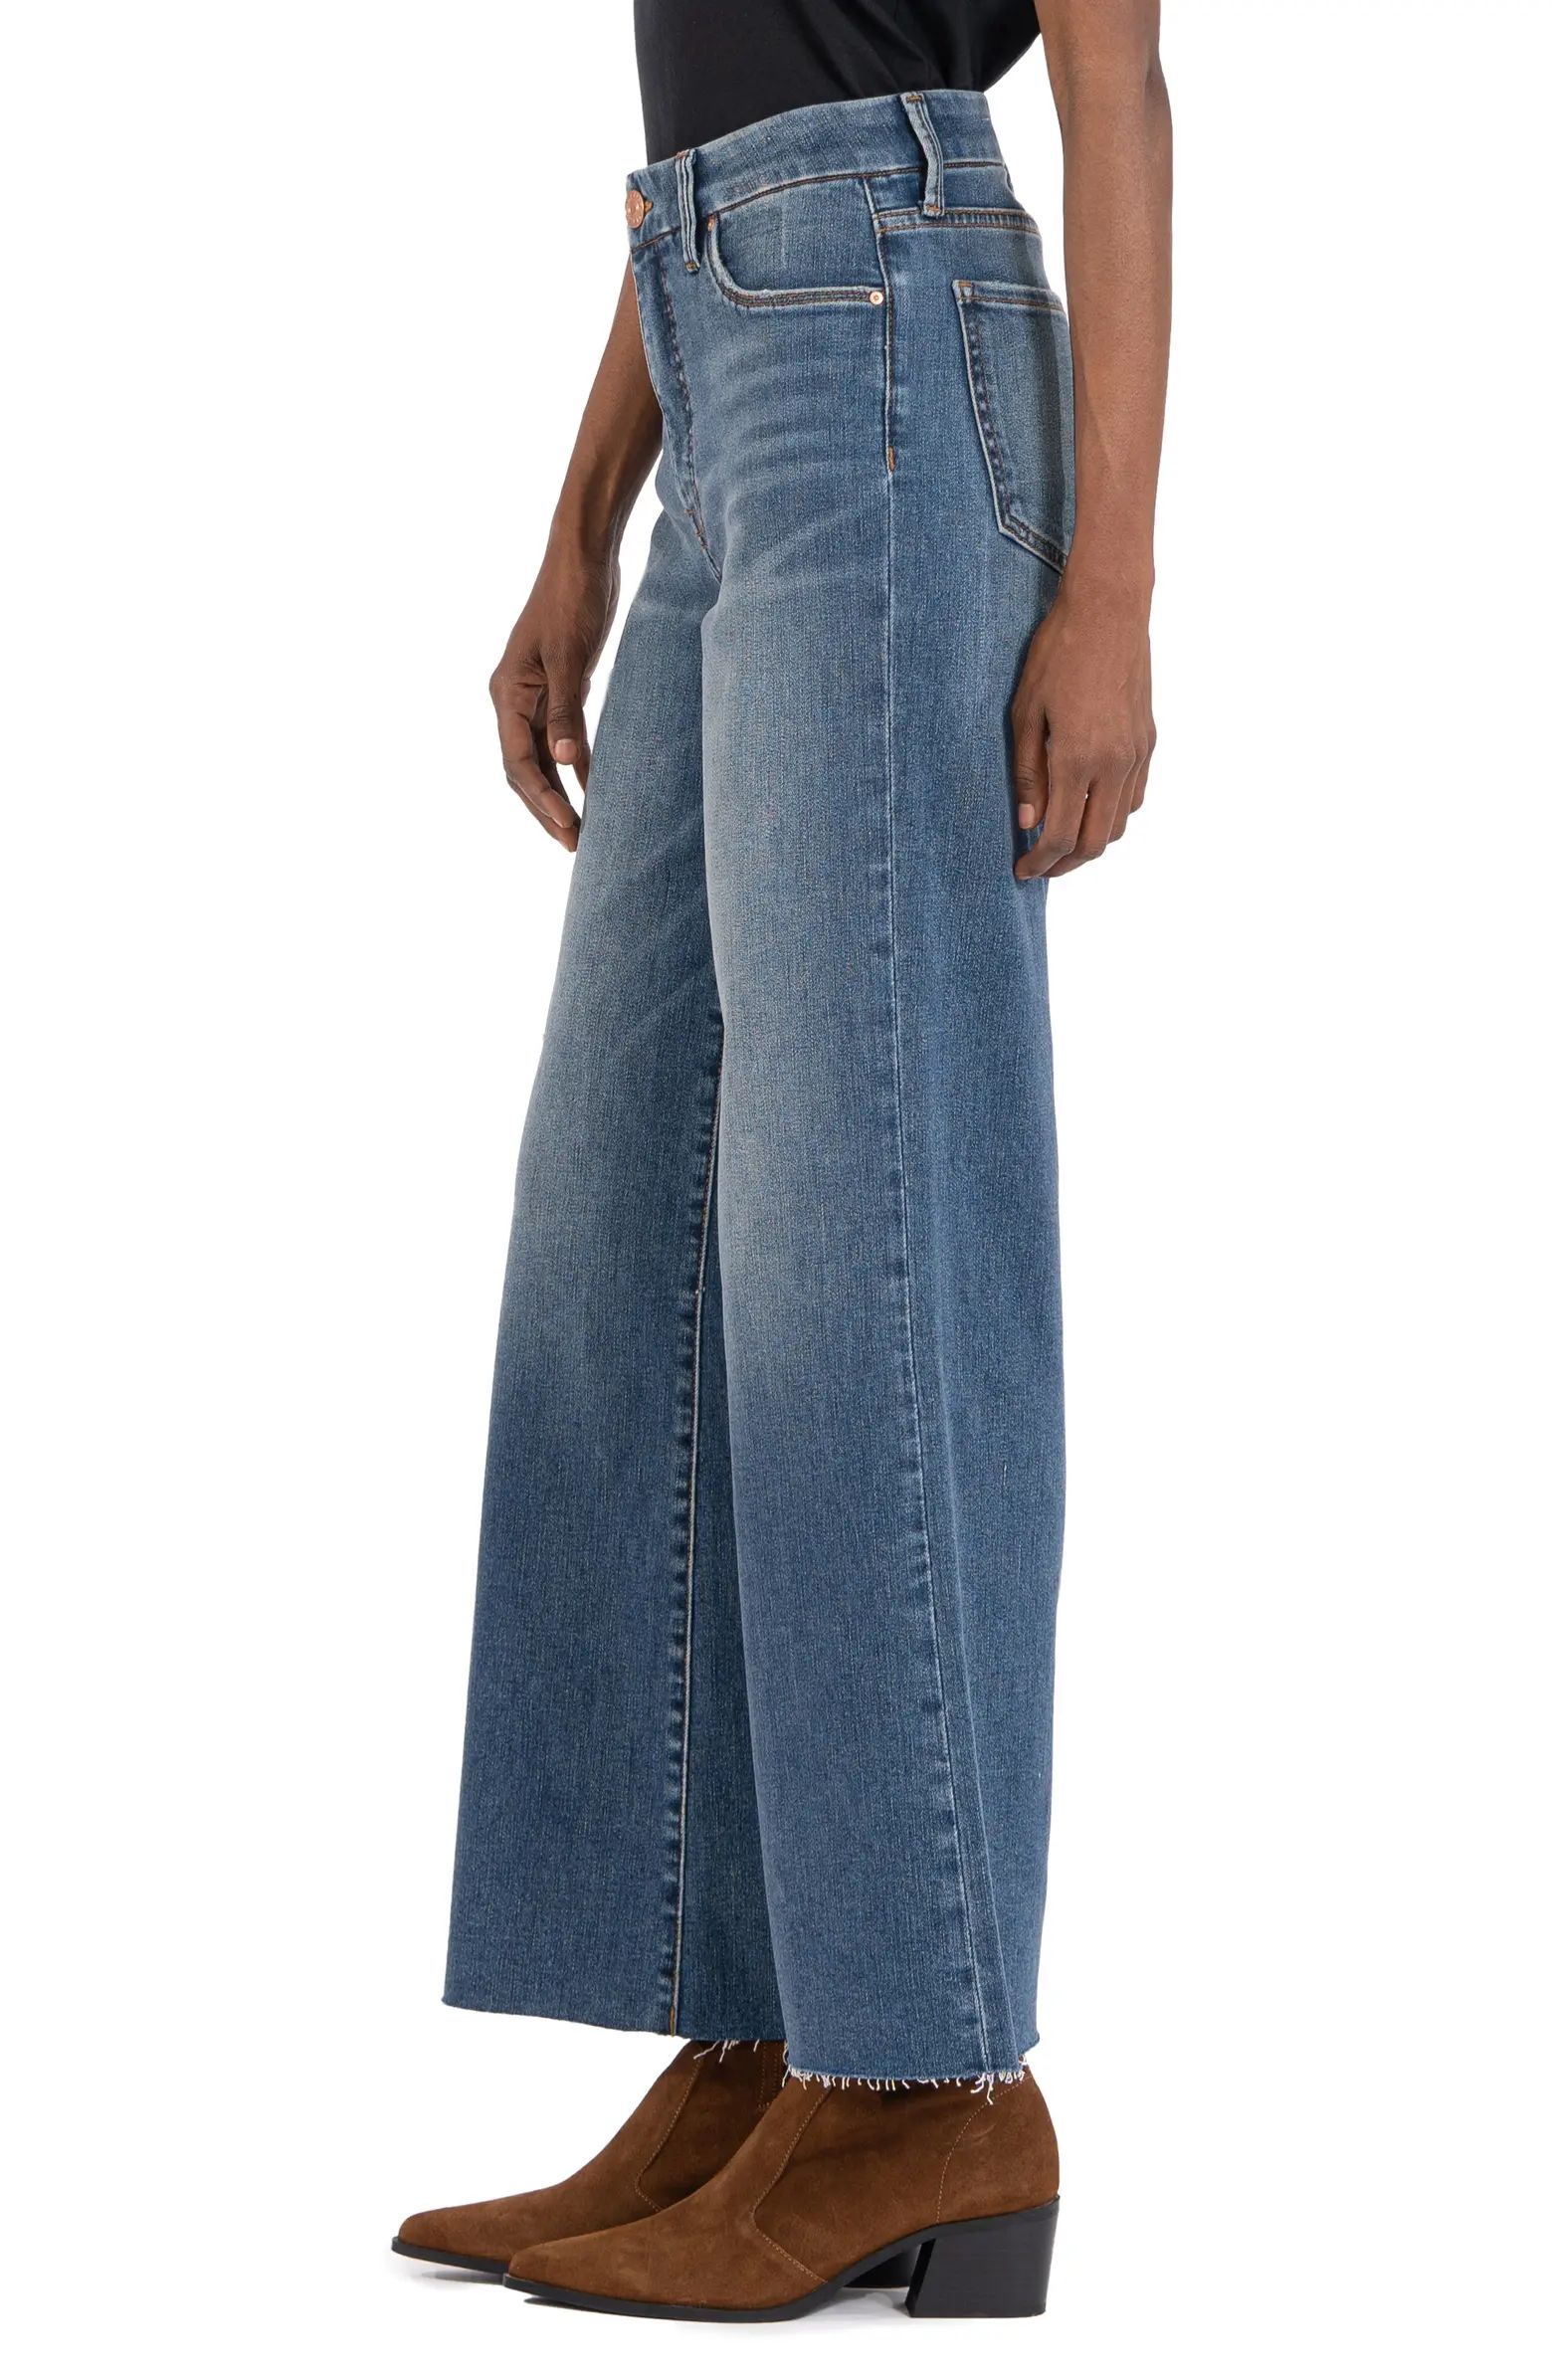 KUT from the Kloth Meg Fab Ab High Waist Raw Hem Ankle Wide Leg Jeans | Nordstrom | Nordstrom